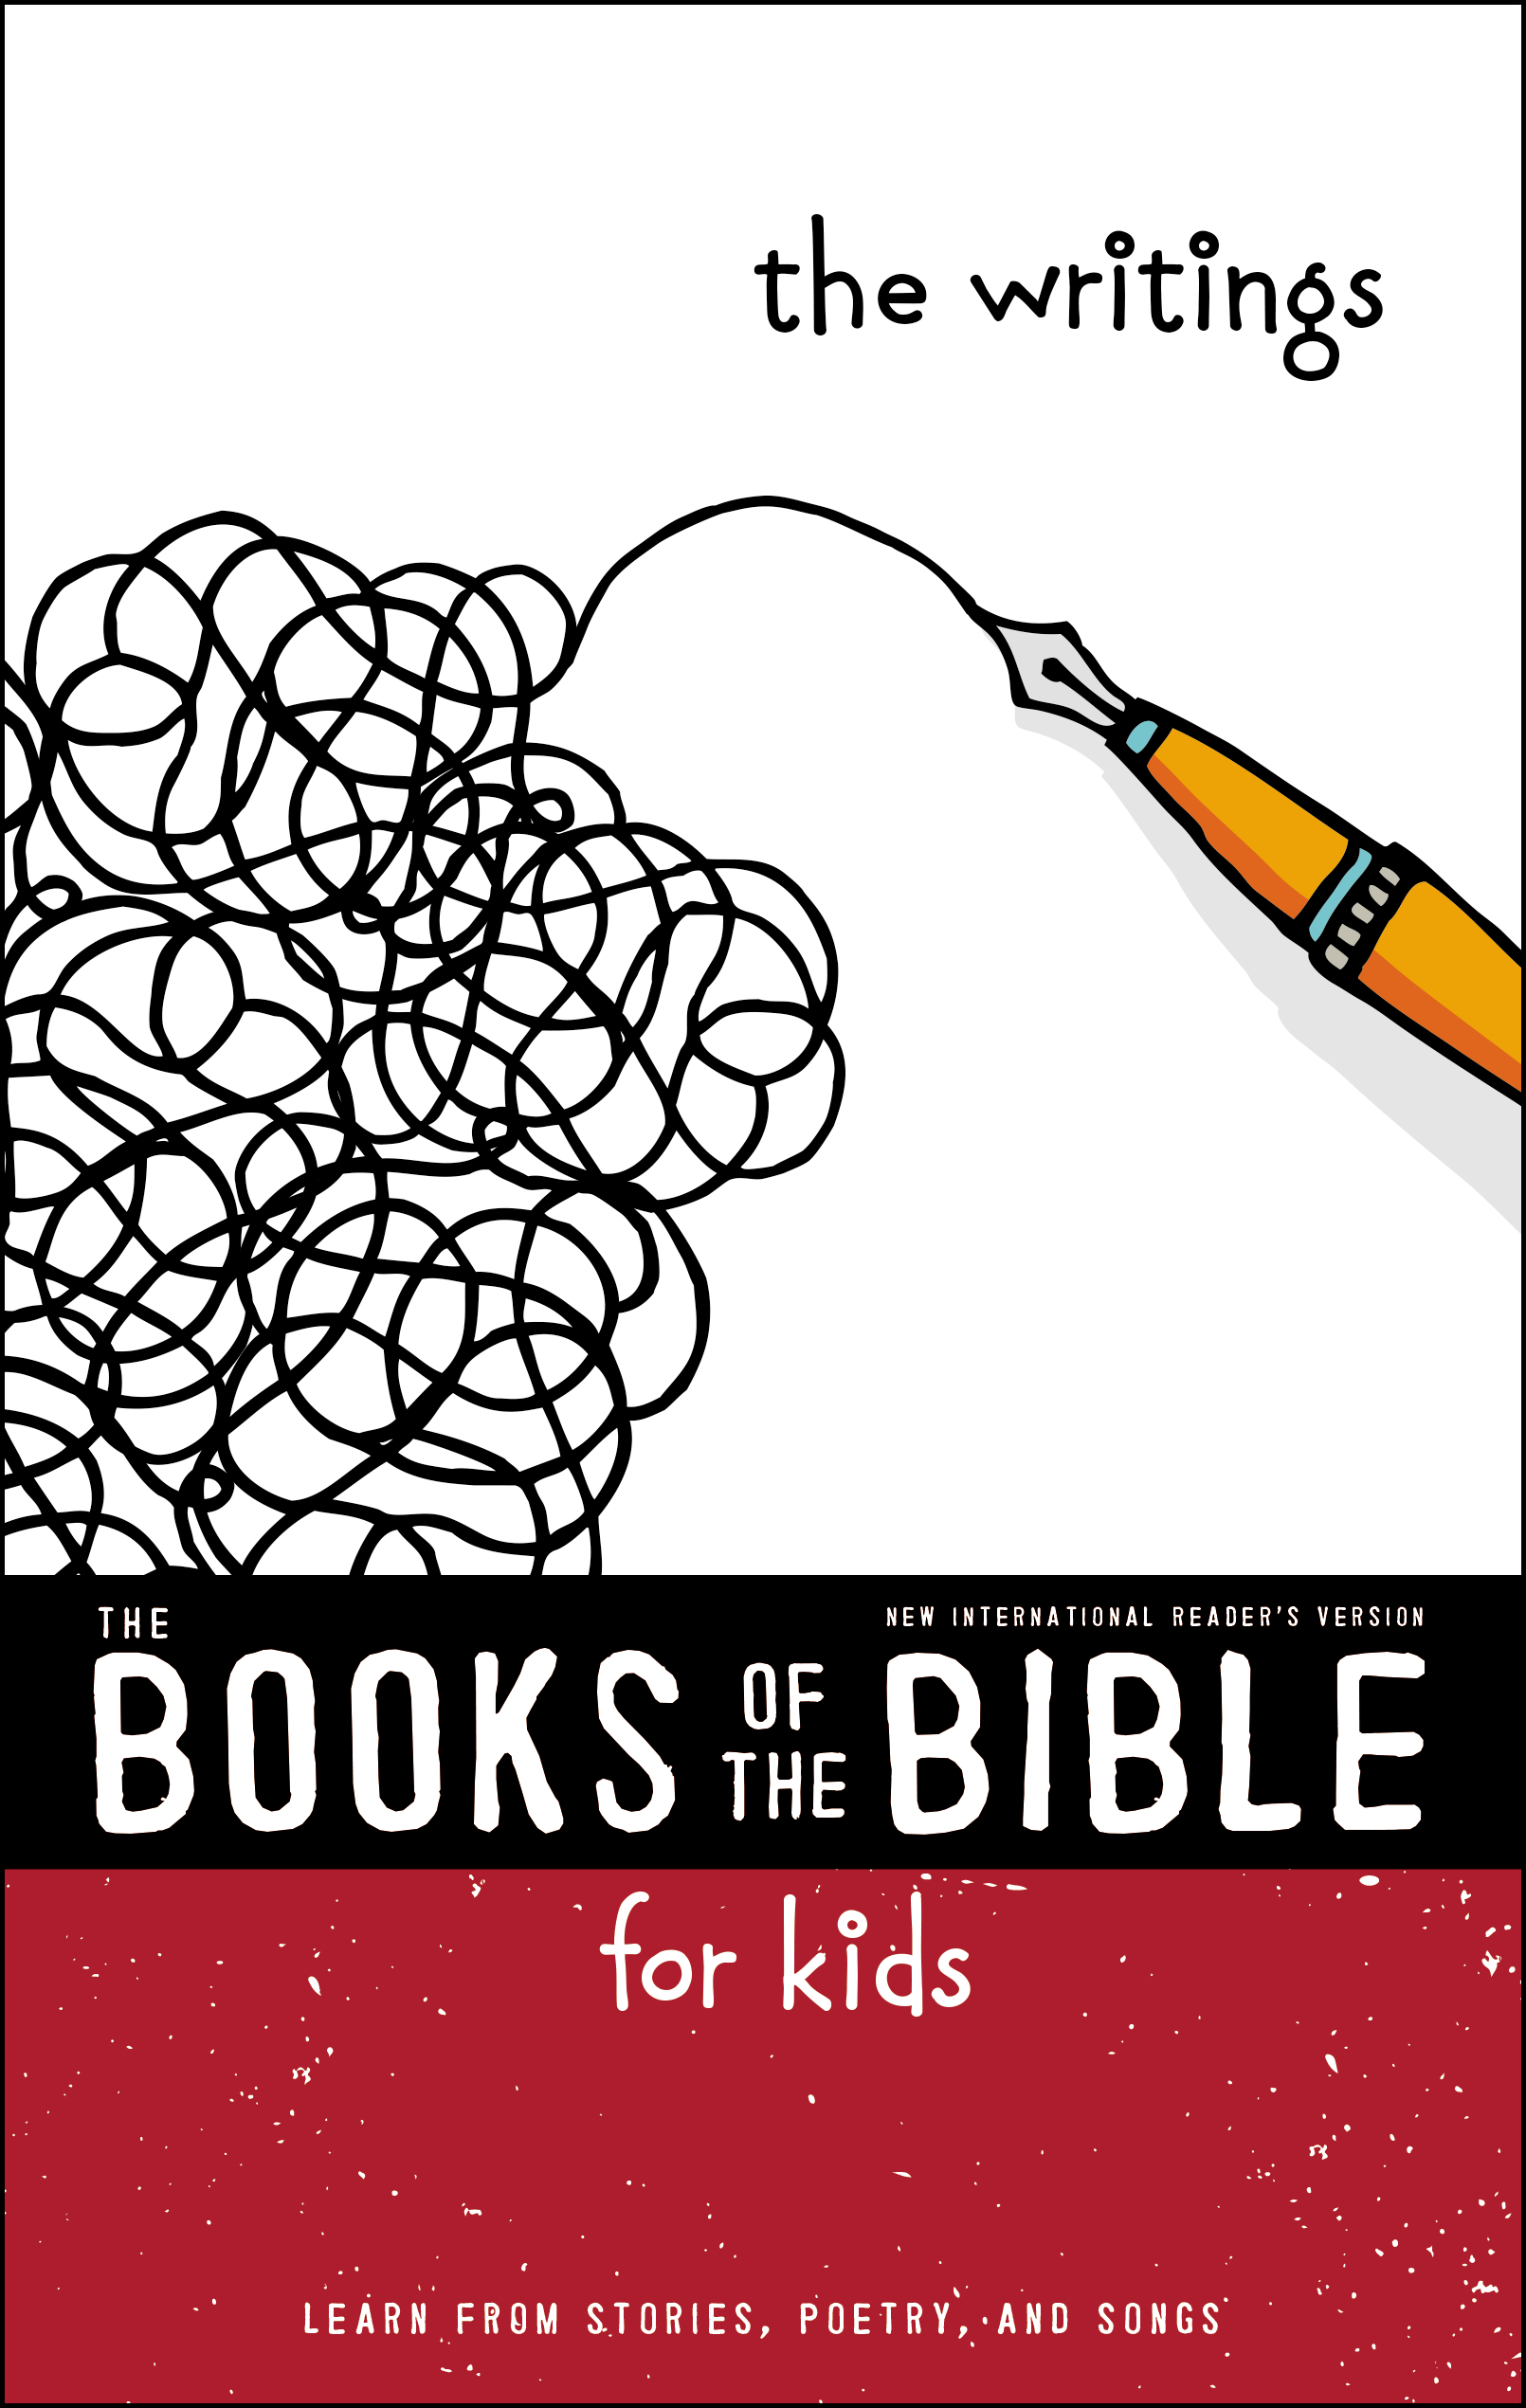 Books of the Bible for Kids: The Writings